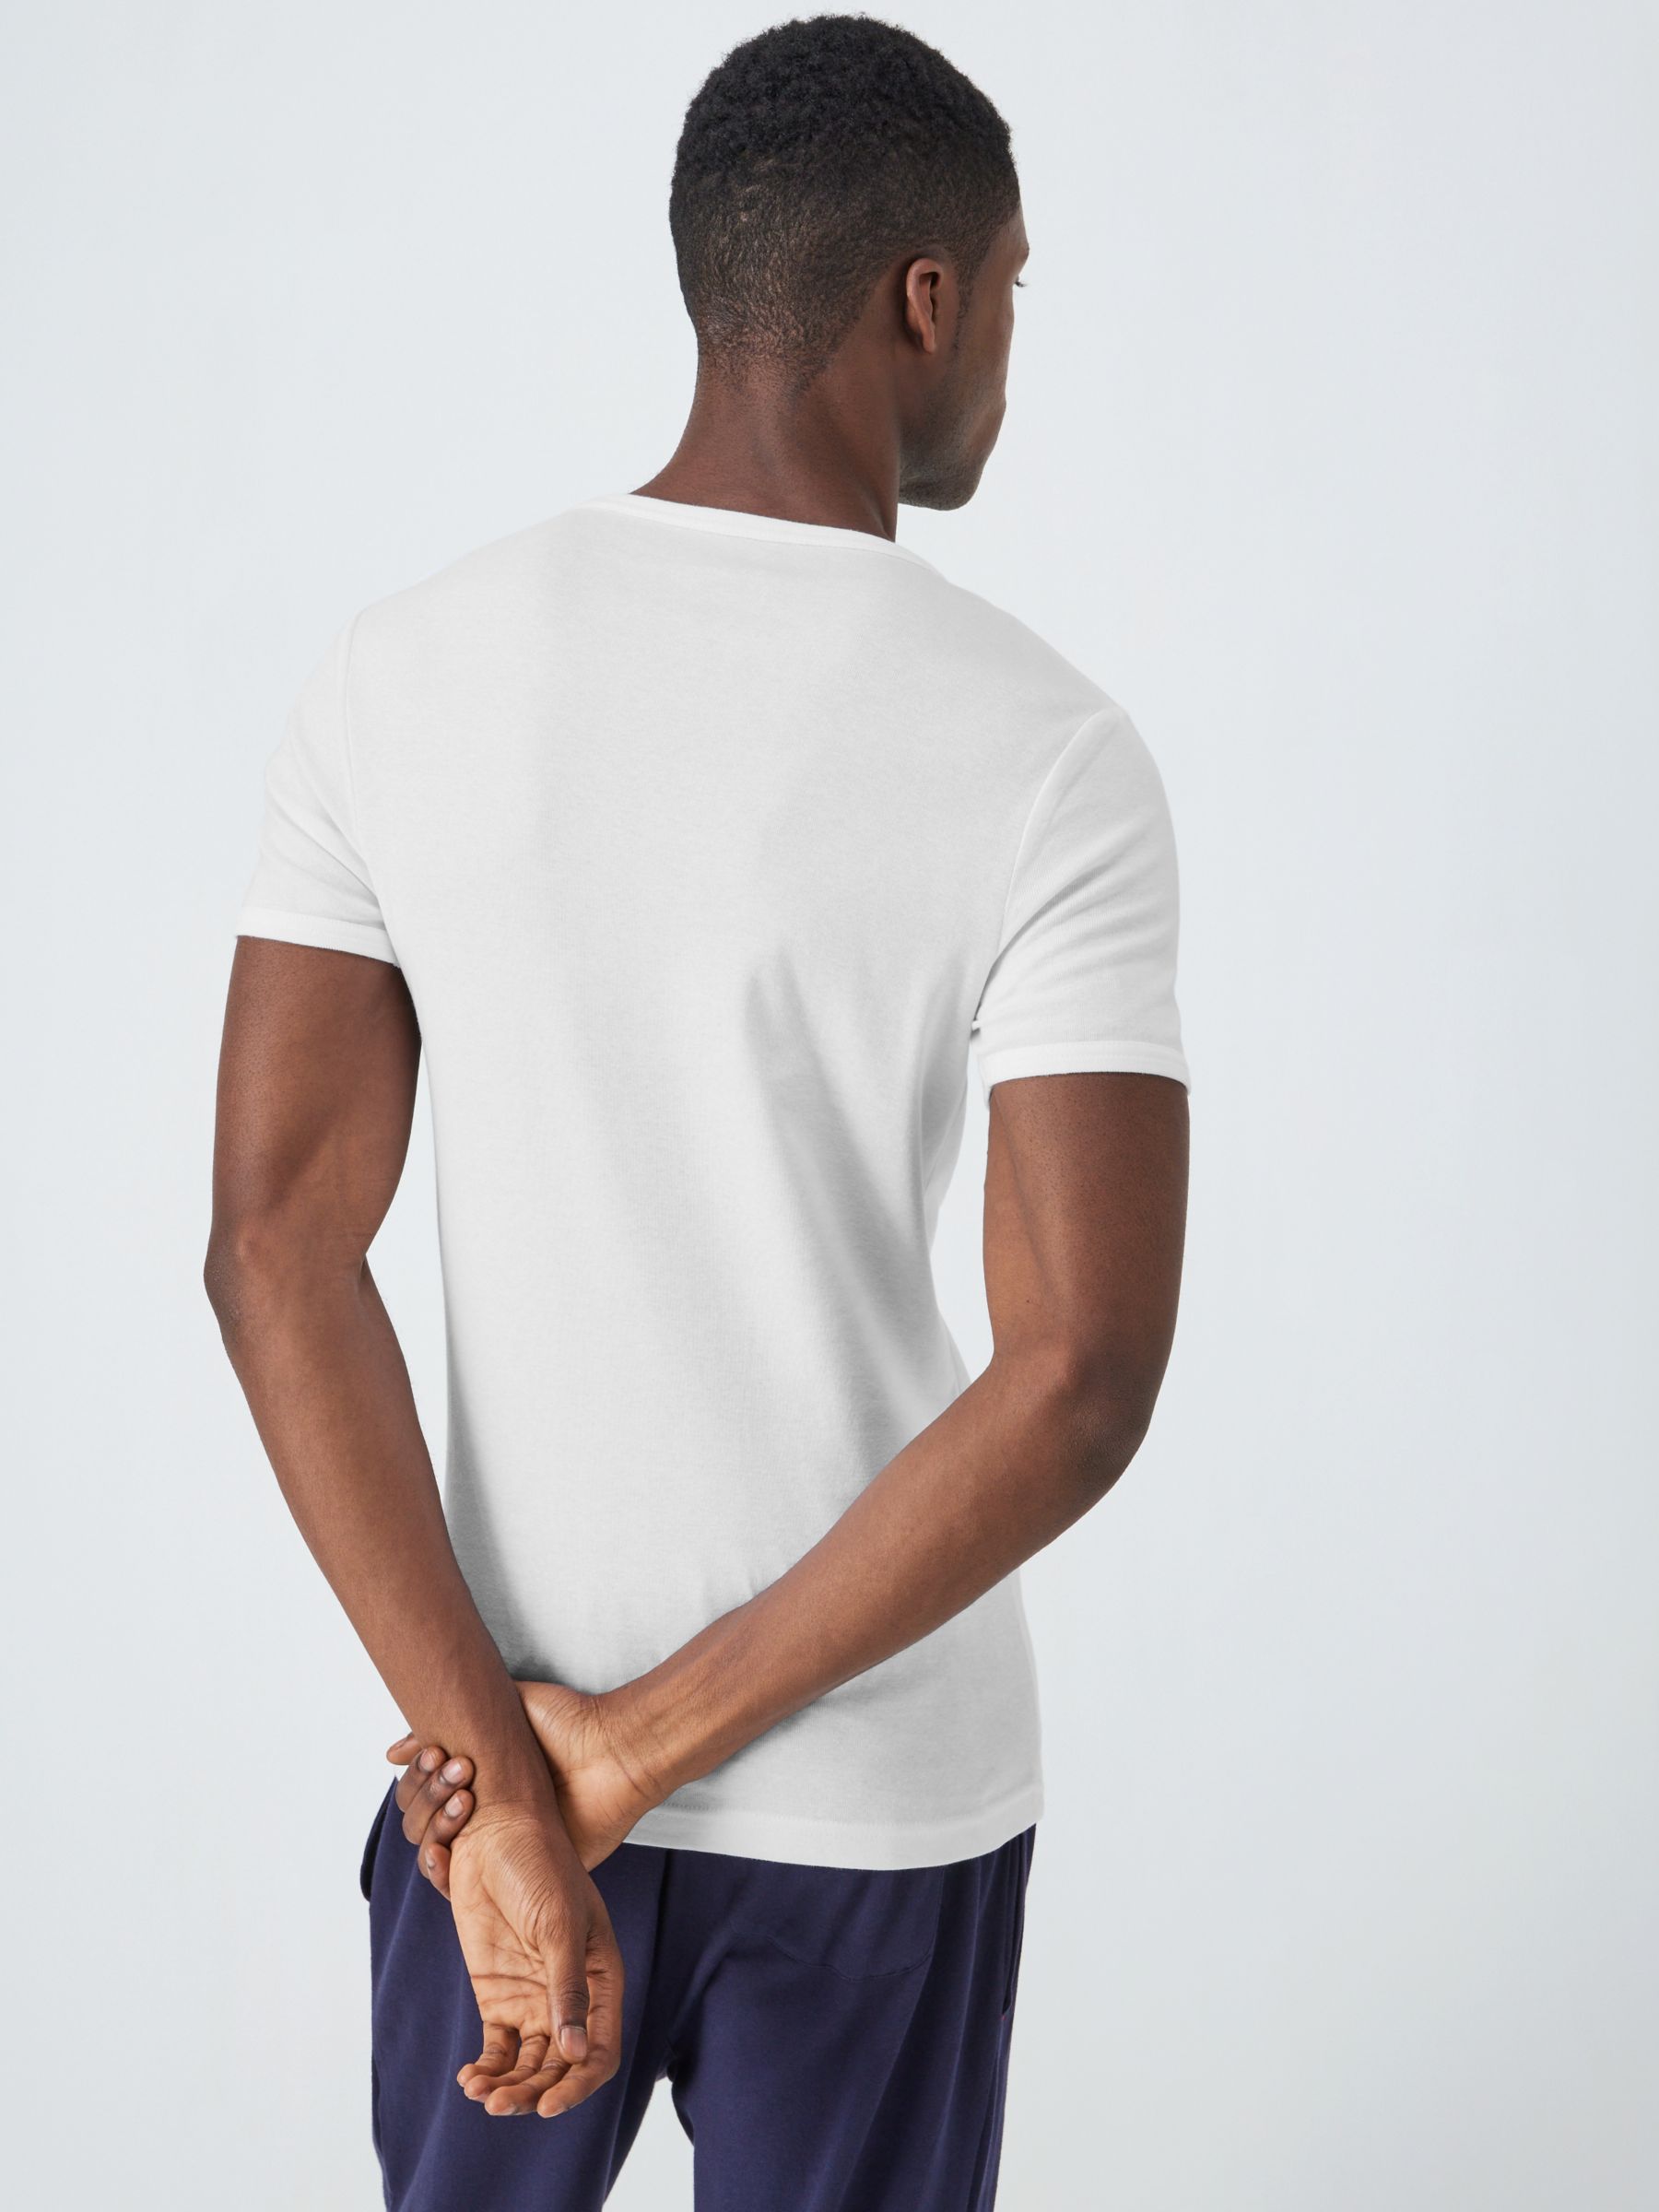 Cotton On Organic Muscle Tees - 2 Pack 2024, Buy Cotton On Online